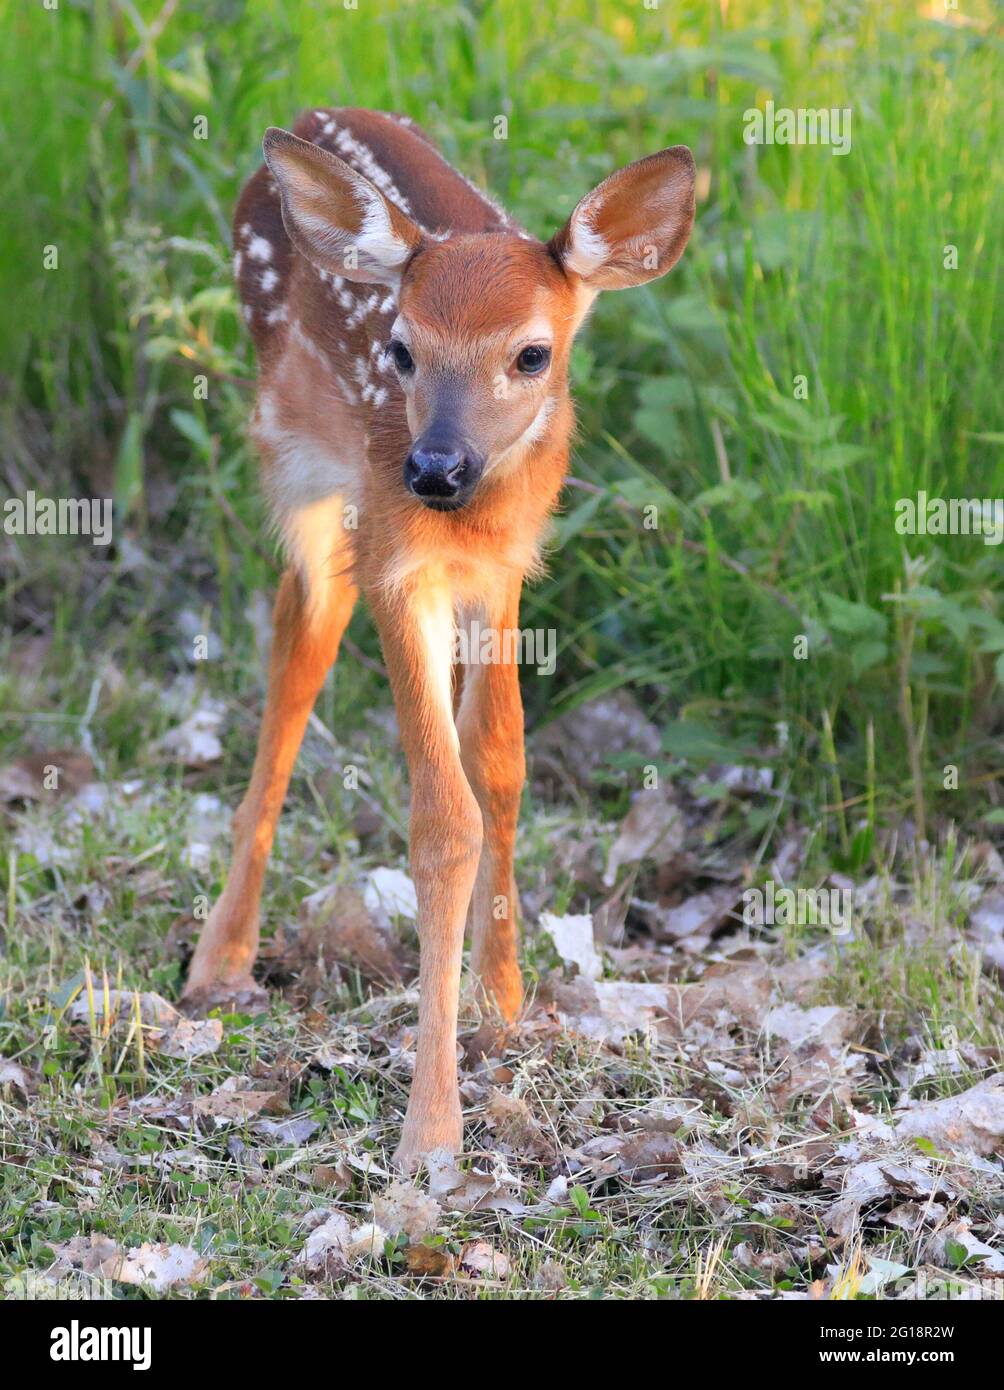 Baby White-tailed Deer (Bambi) portrait into the grass, Quebec, Canada Stock Photo